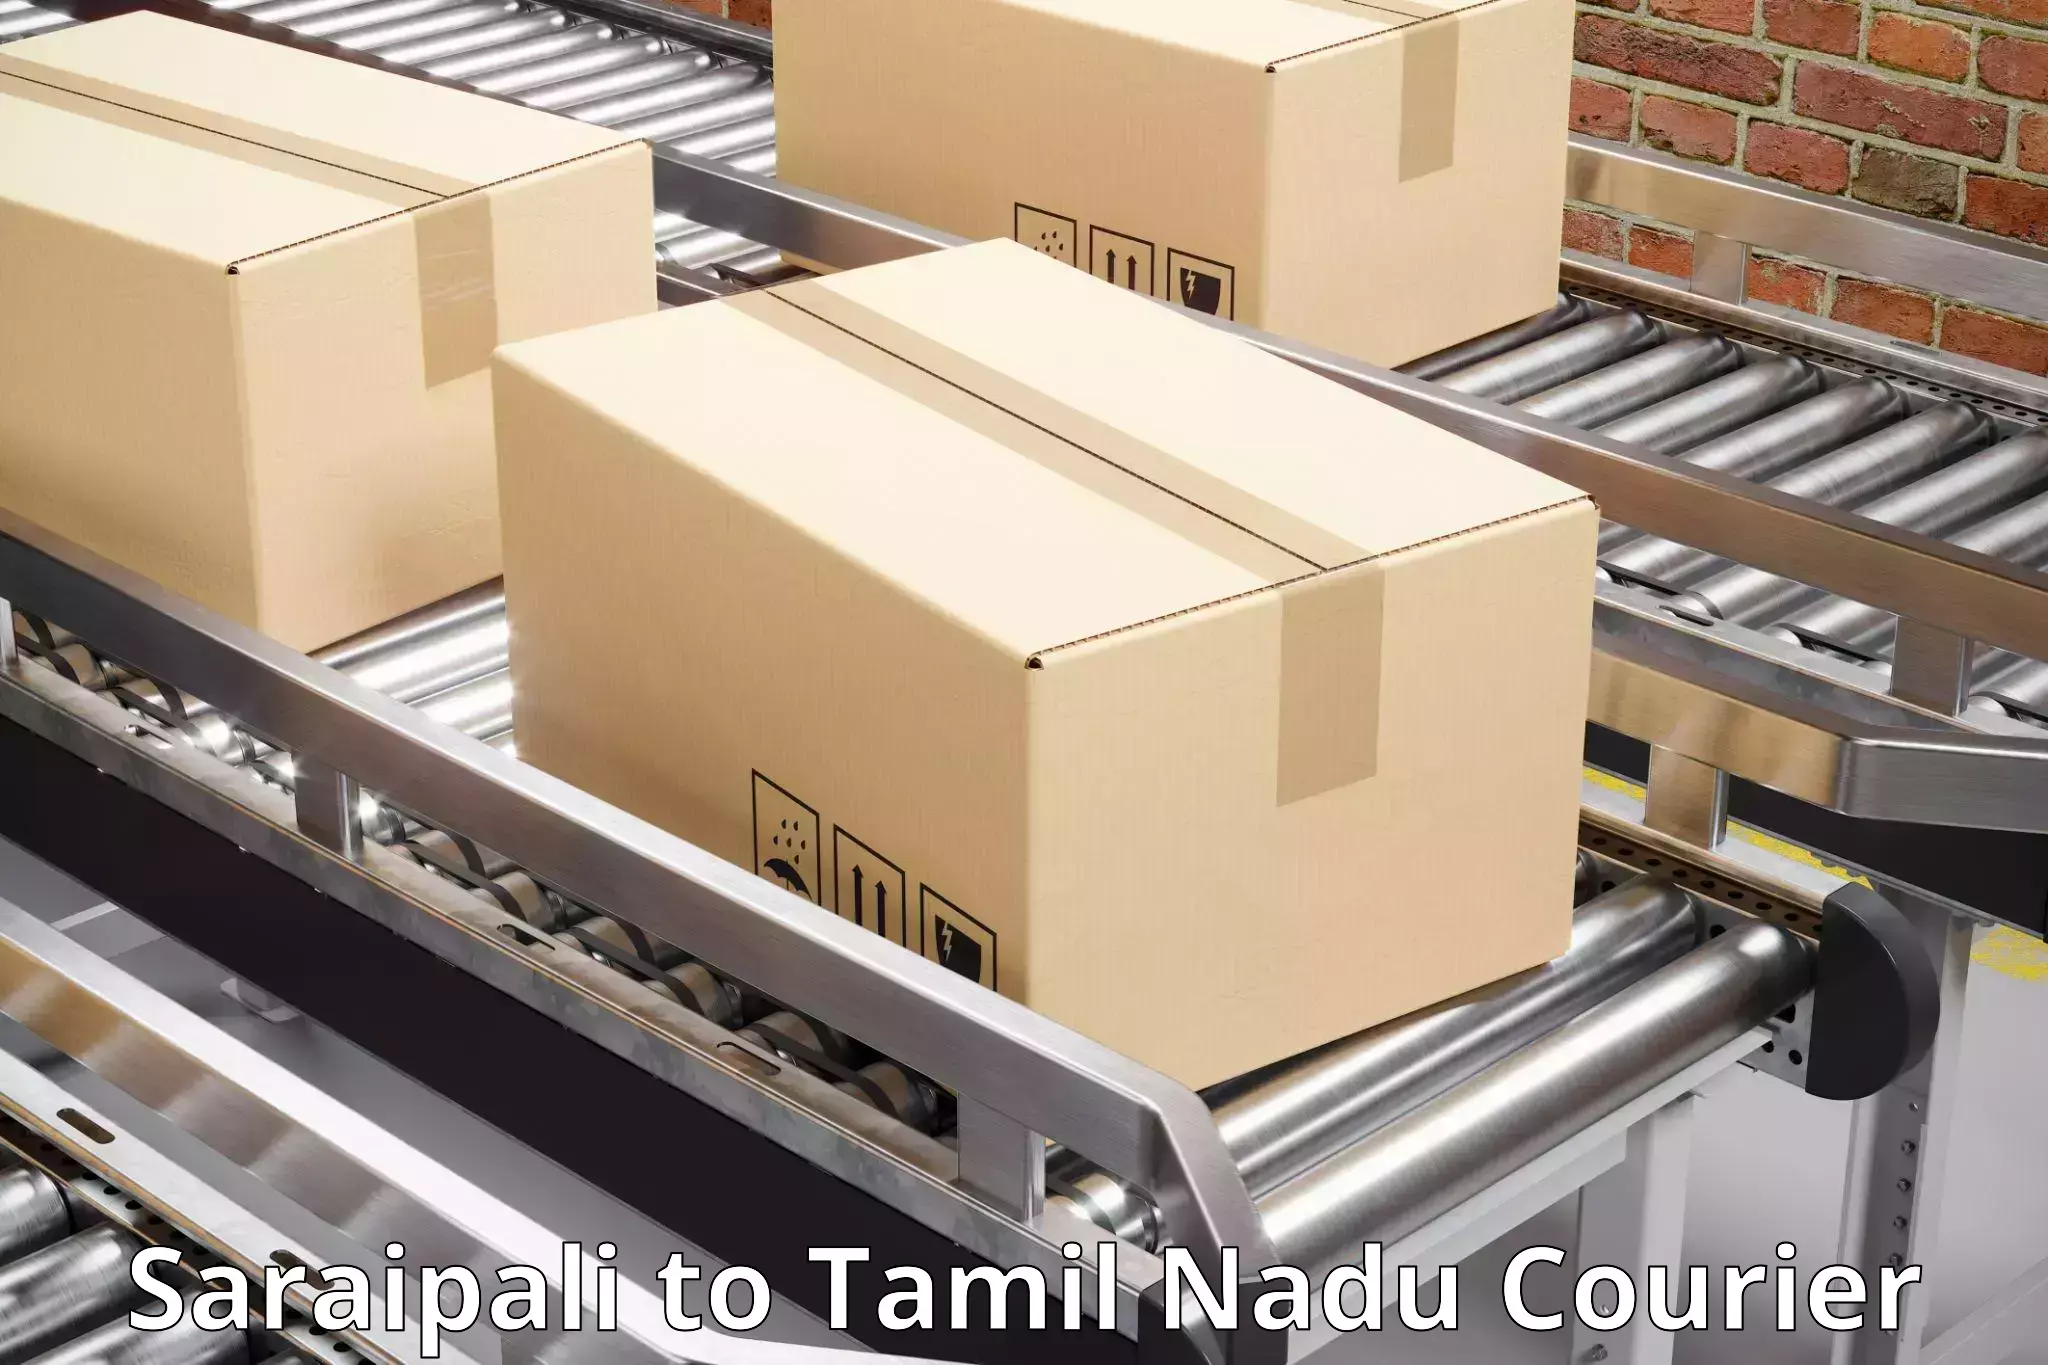 Flexible delivery schedules Saraipali to Perambalur